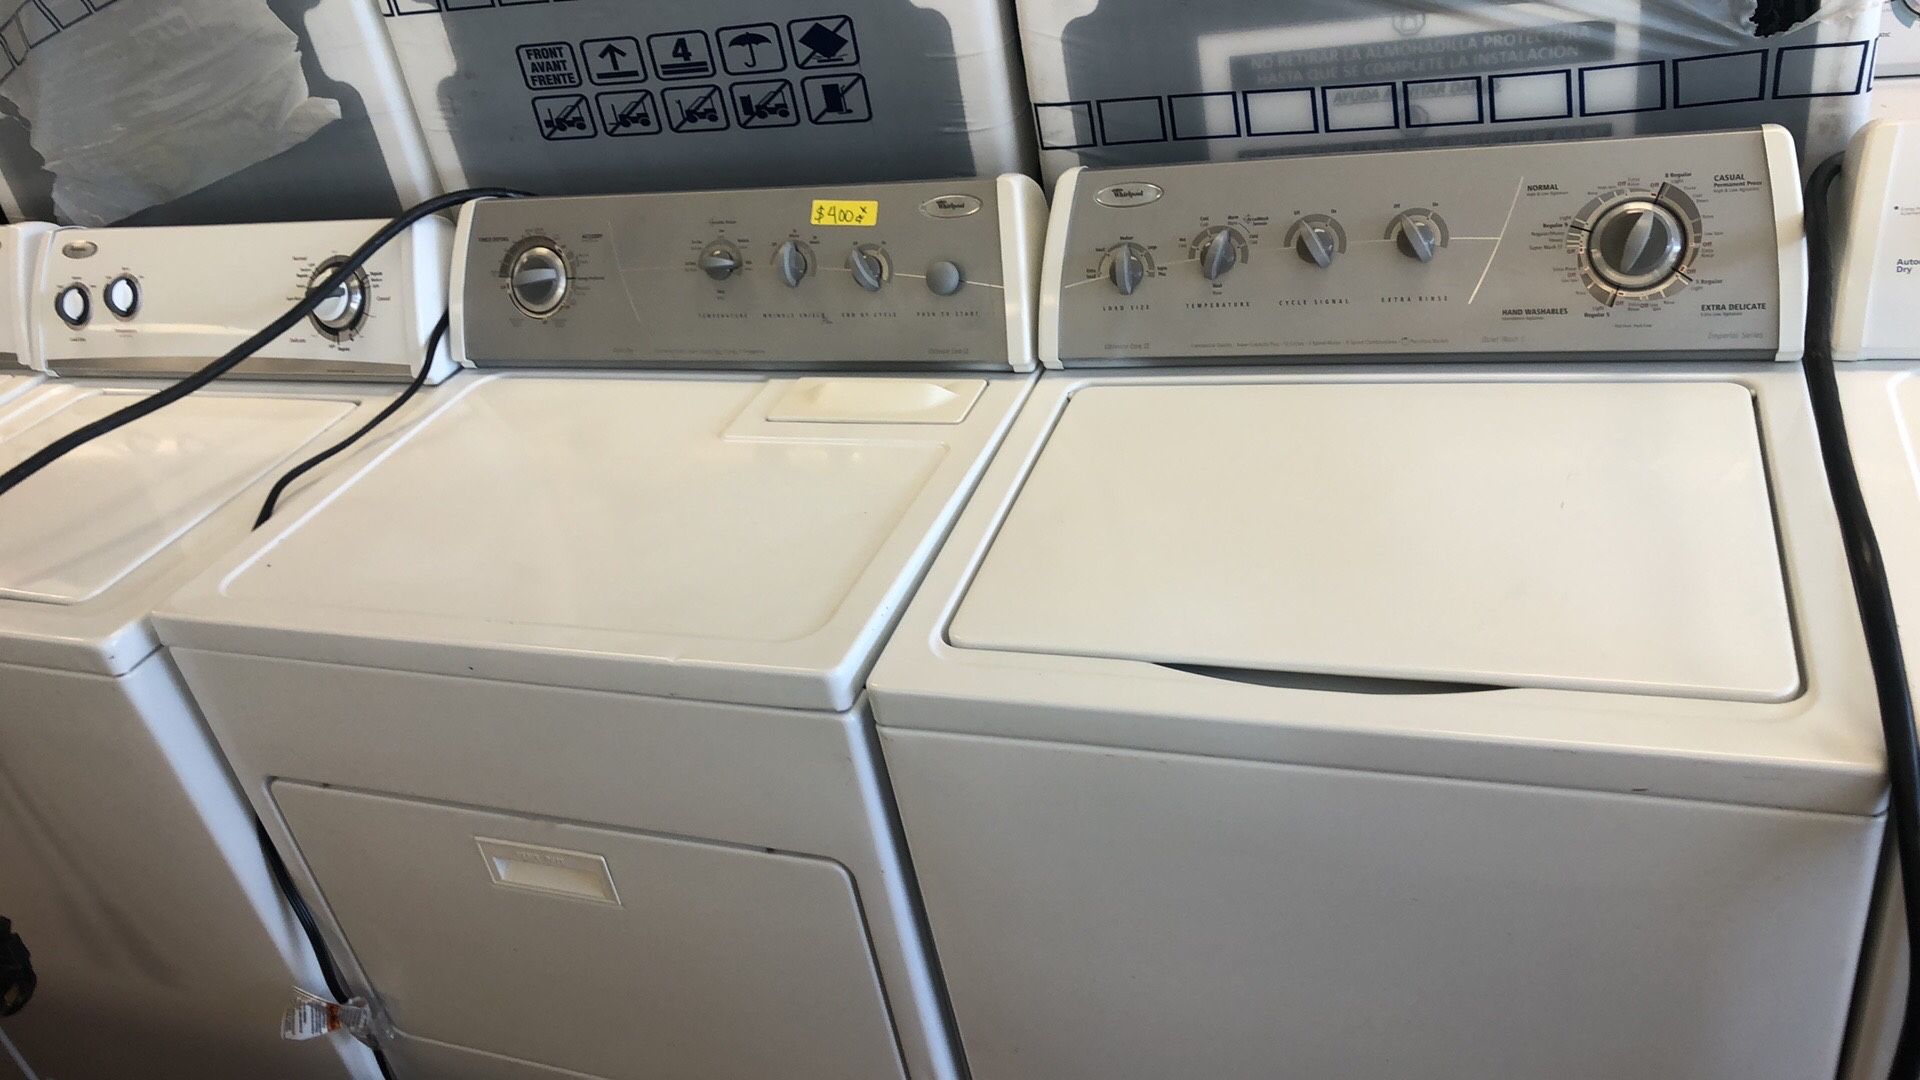 Whirlpool washer and dryer electric